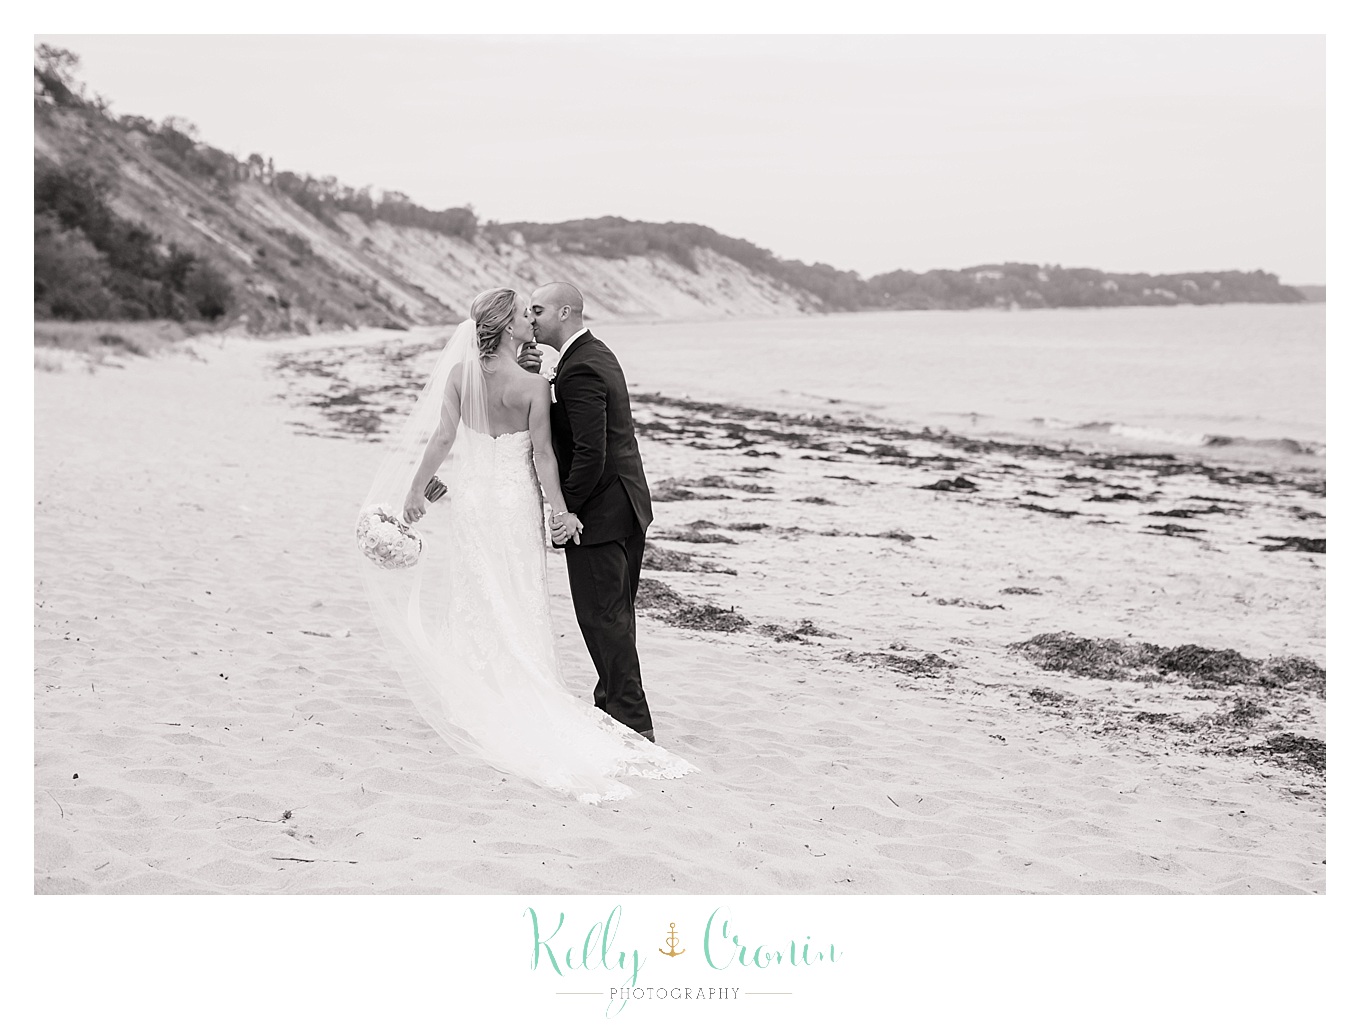 A newlywed couple stroll along the shore together, wedding held at the White Cliffs Country club and captured by Kelly Cronin Photography